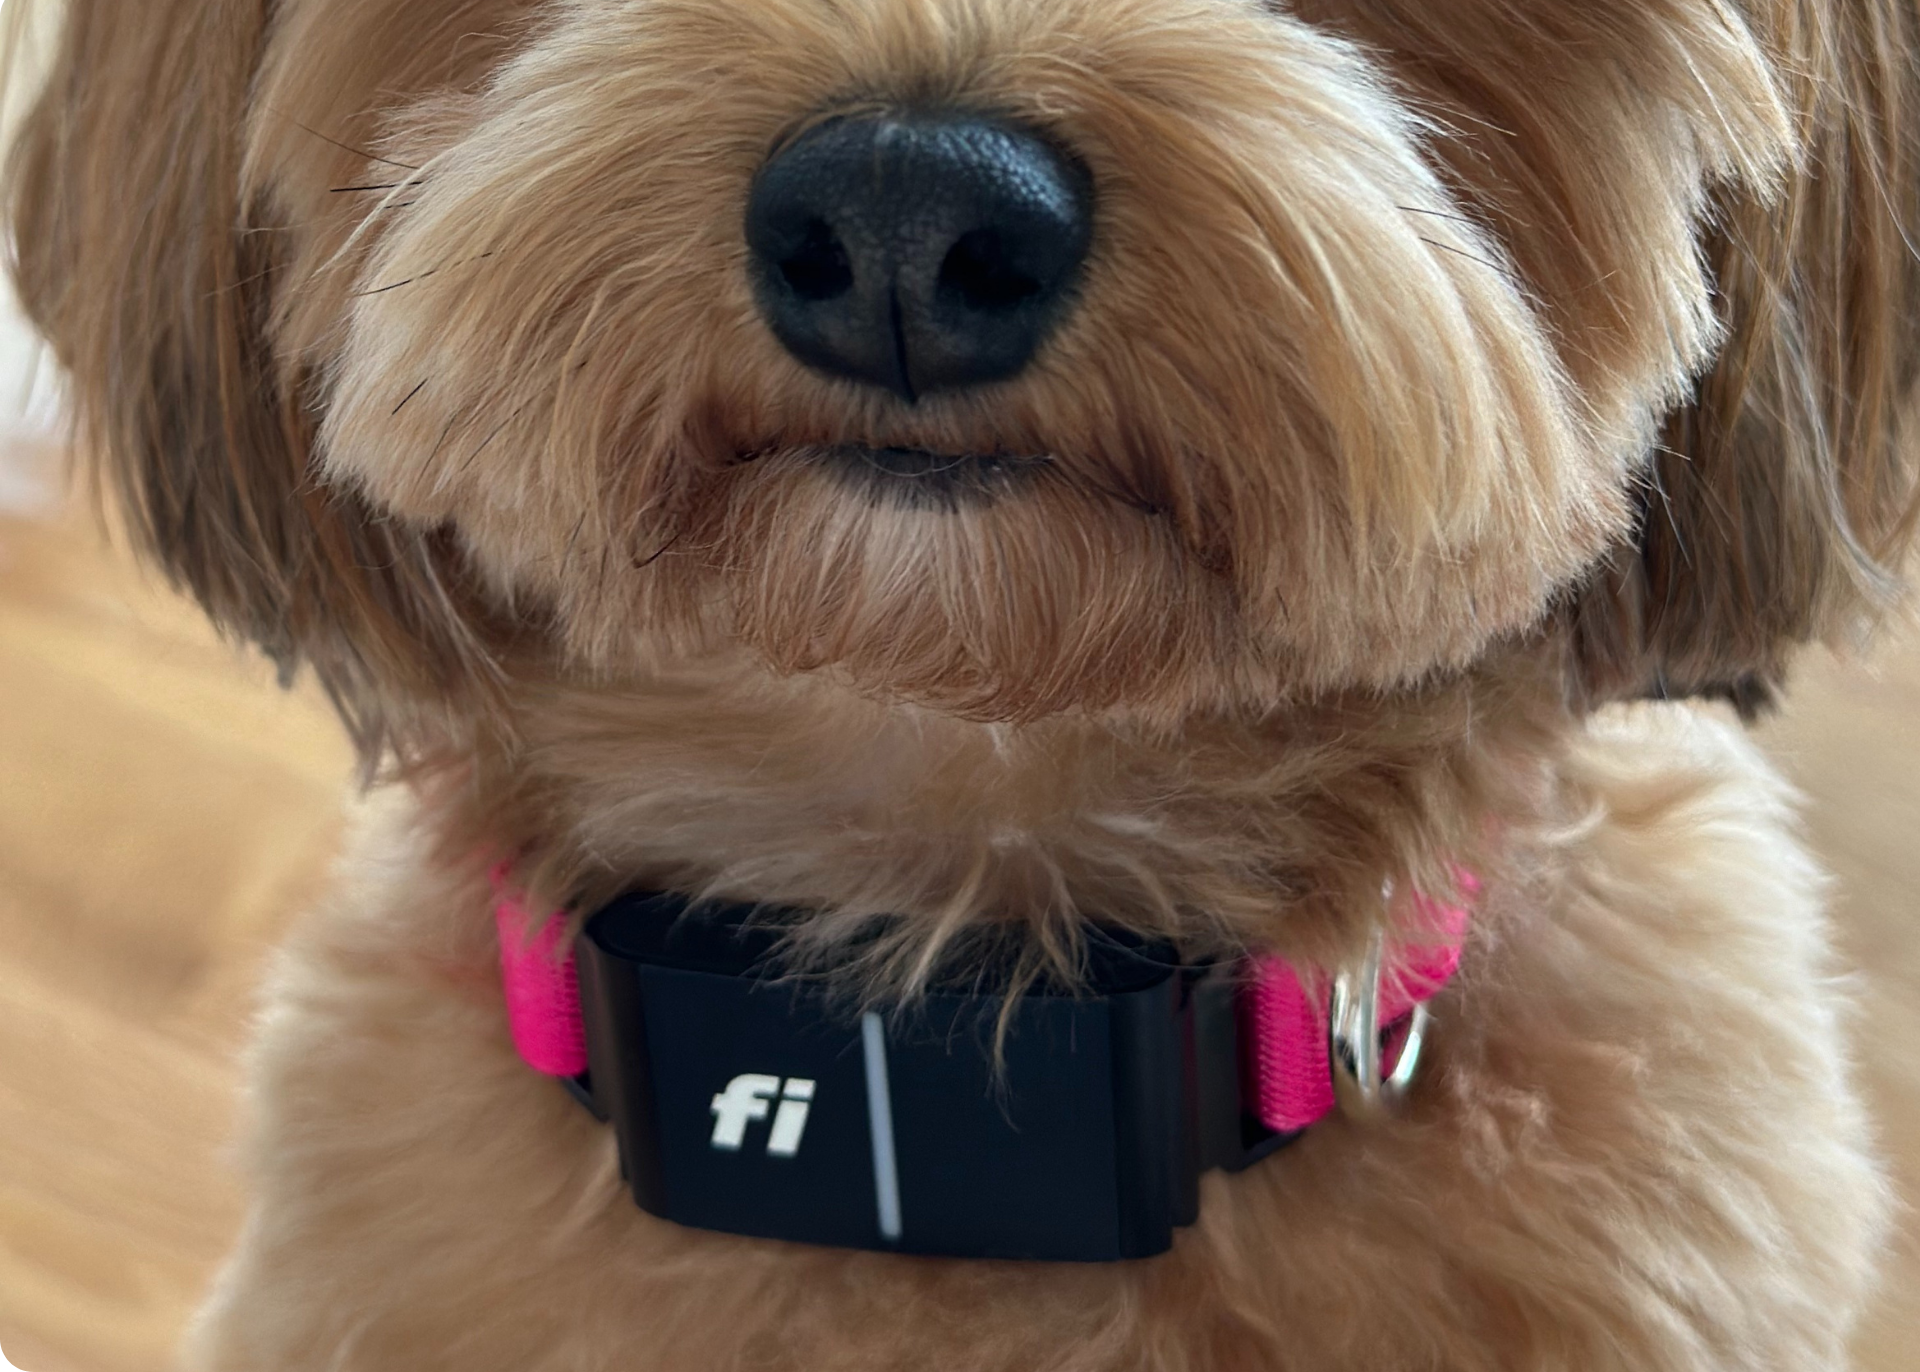 Close up of Fi GPS device on pink collar, worn by red Havanese. Shows only snout and neck.